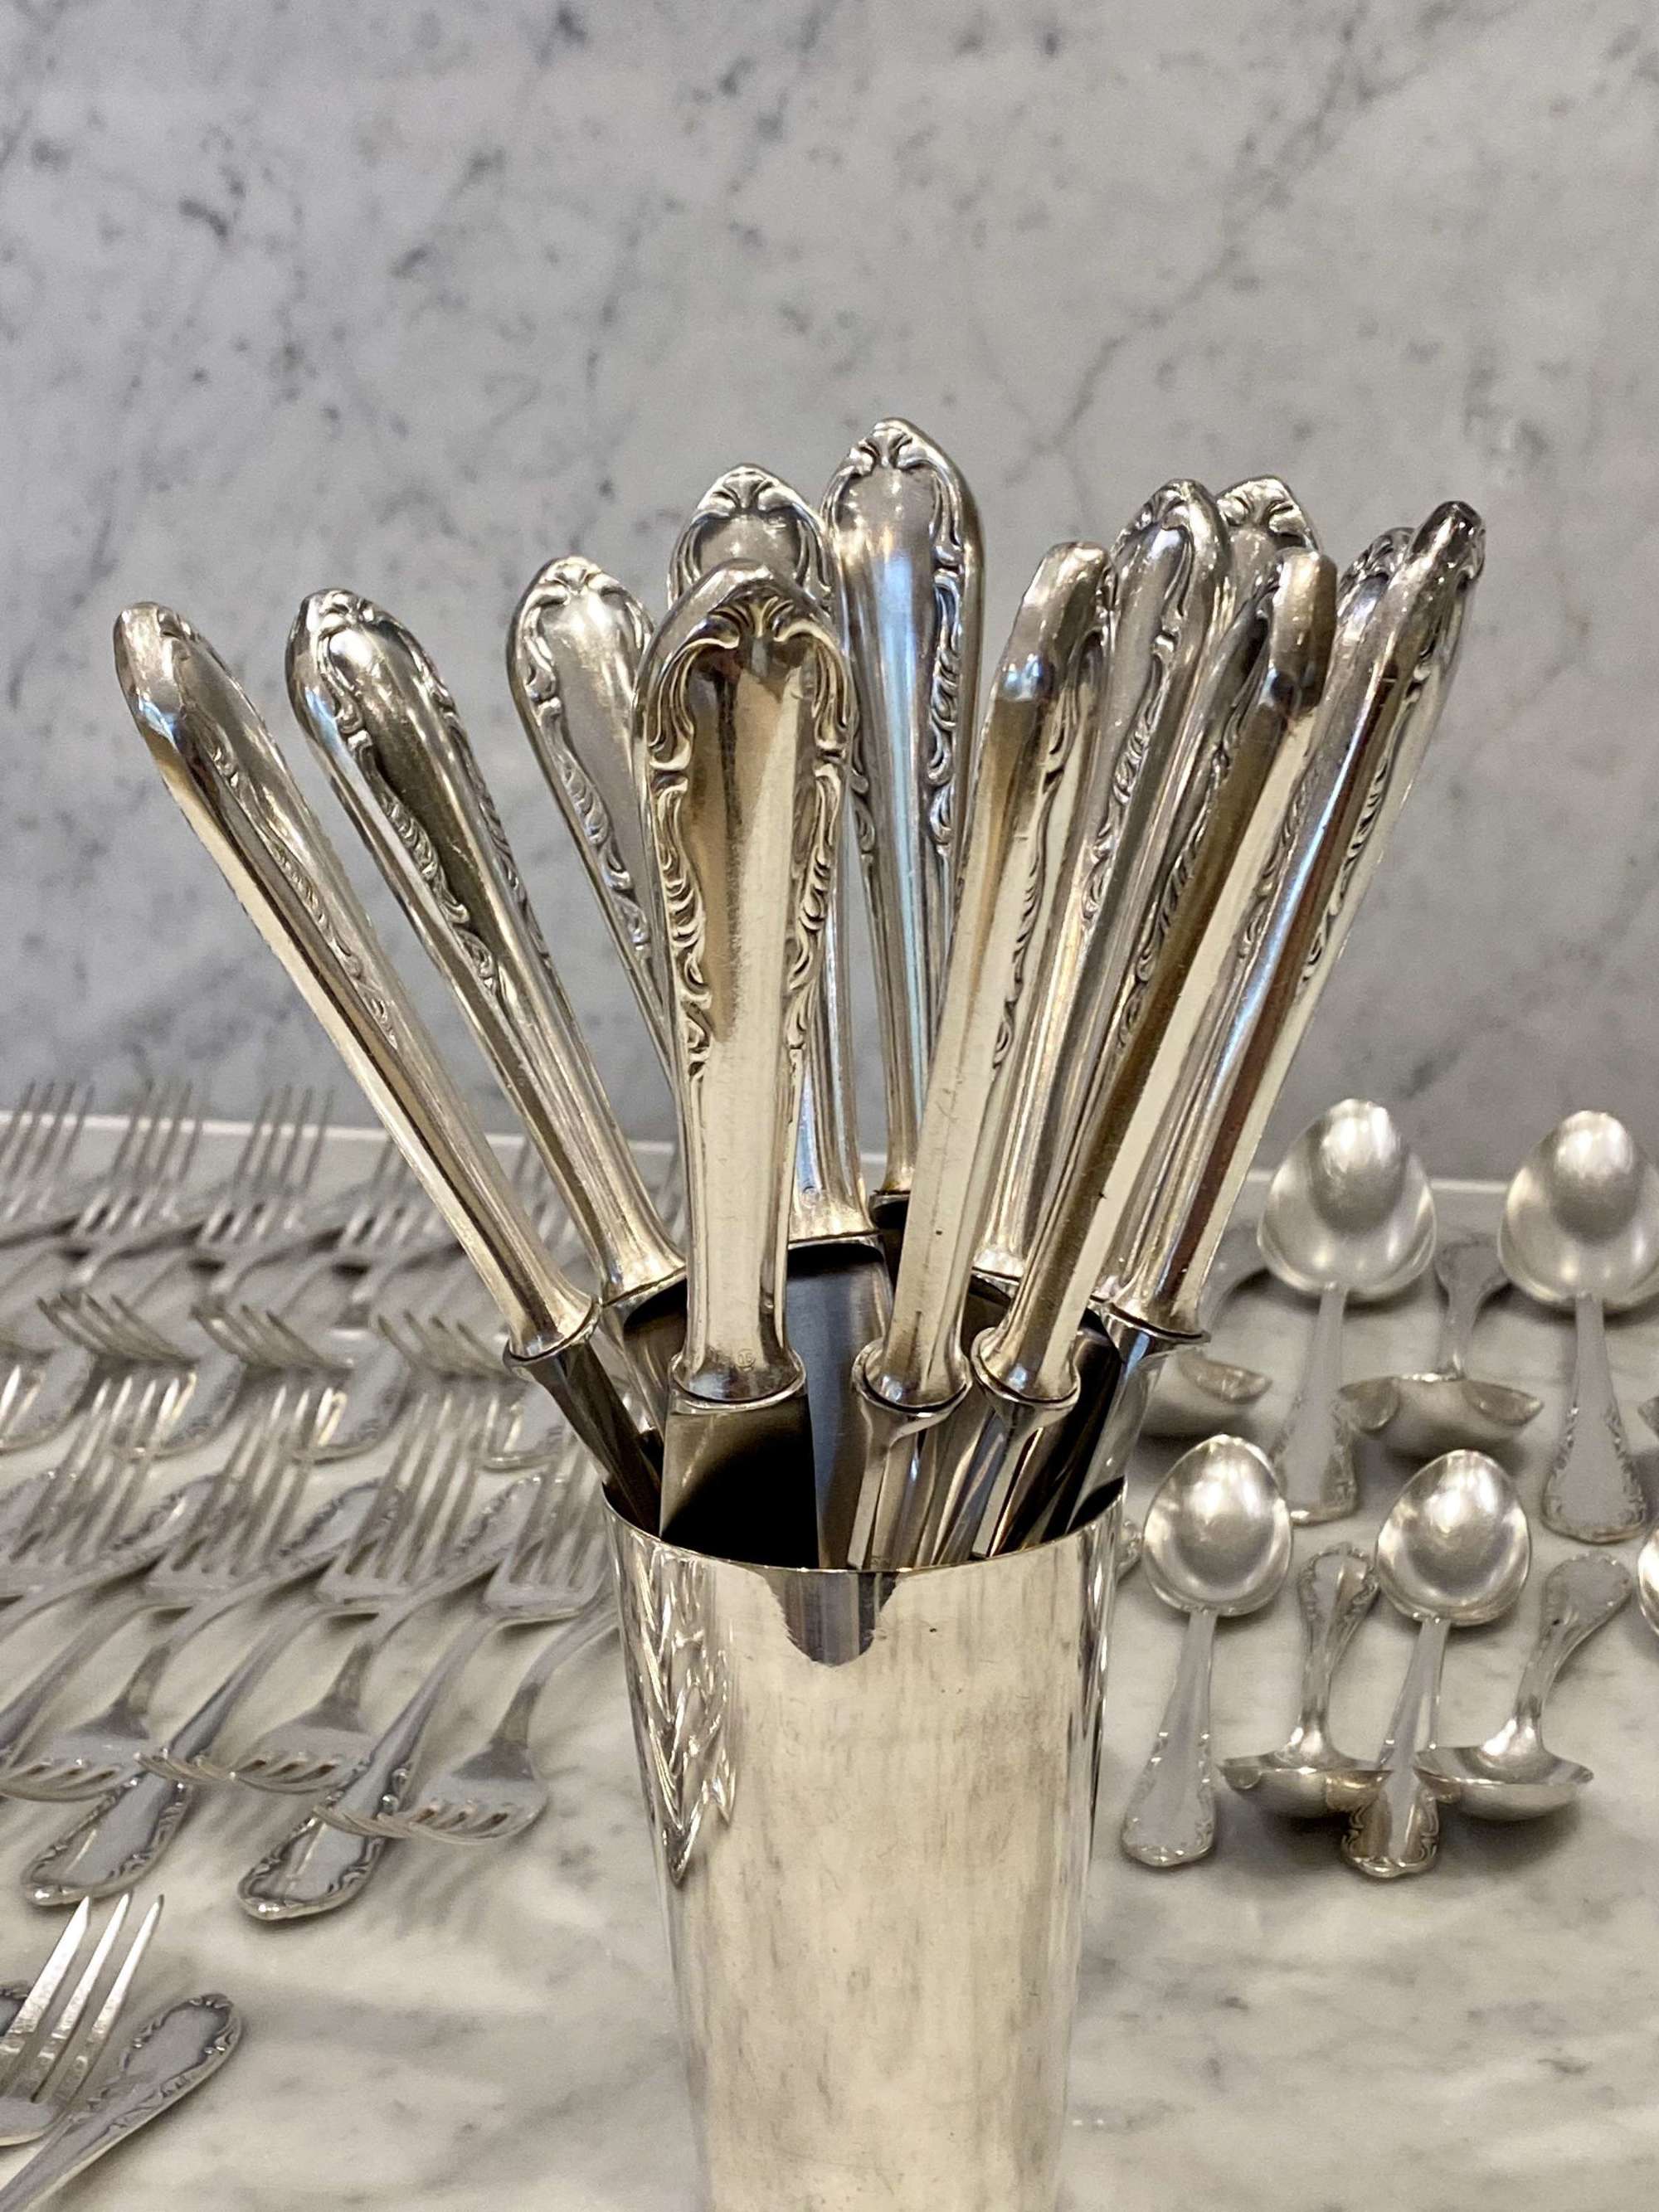 Full set of Art Deco silver plated cutlery for 12 people